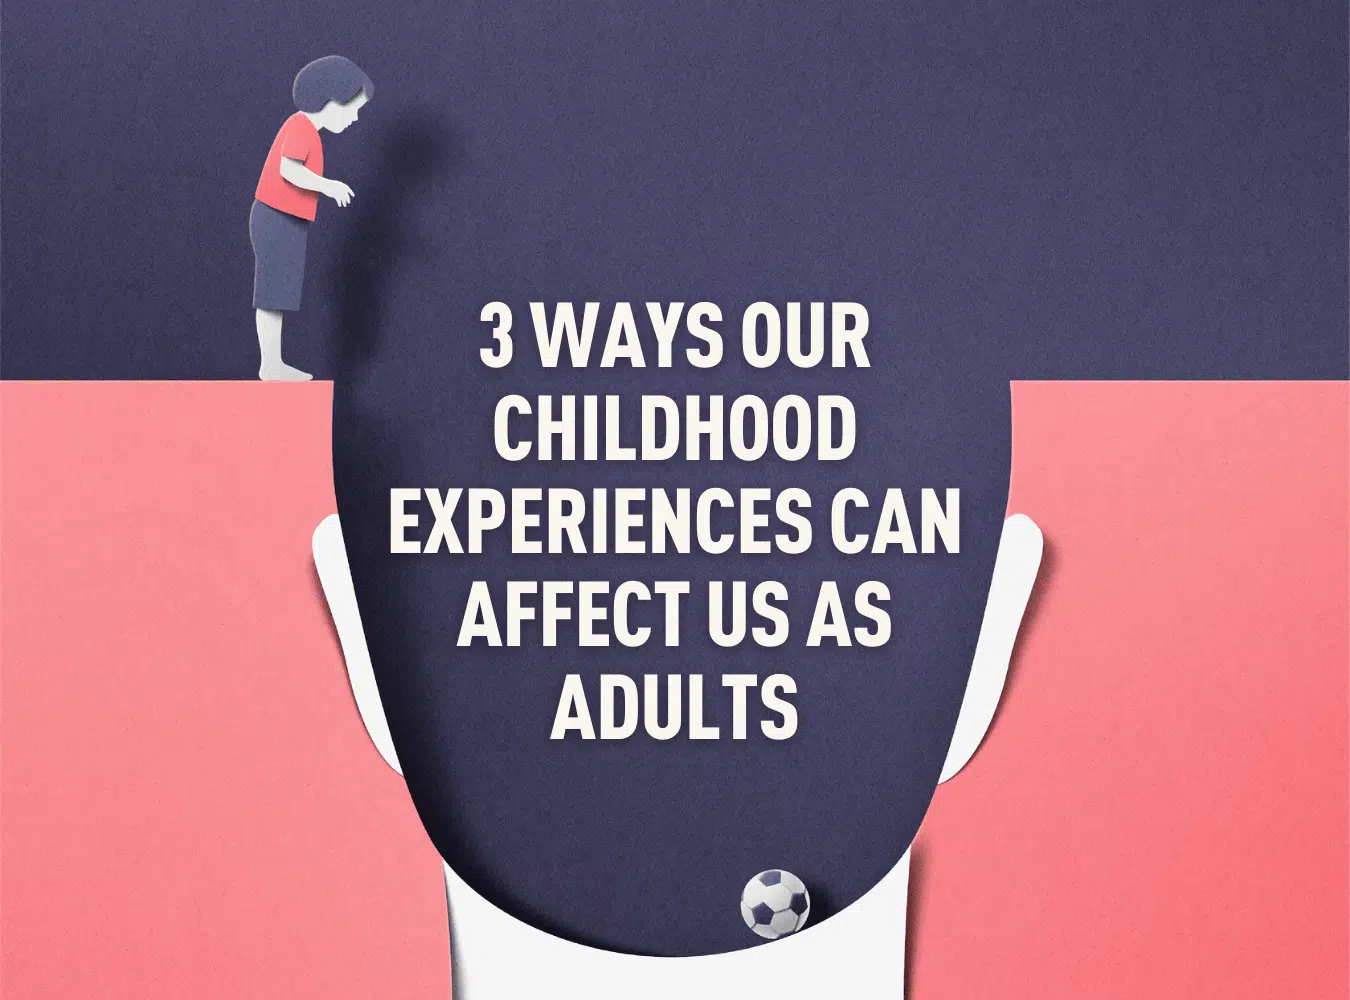 '3 Ways Our Childhood Experiences Can Affect Us As Adults"